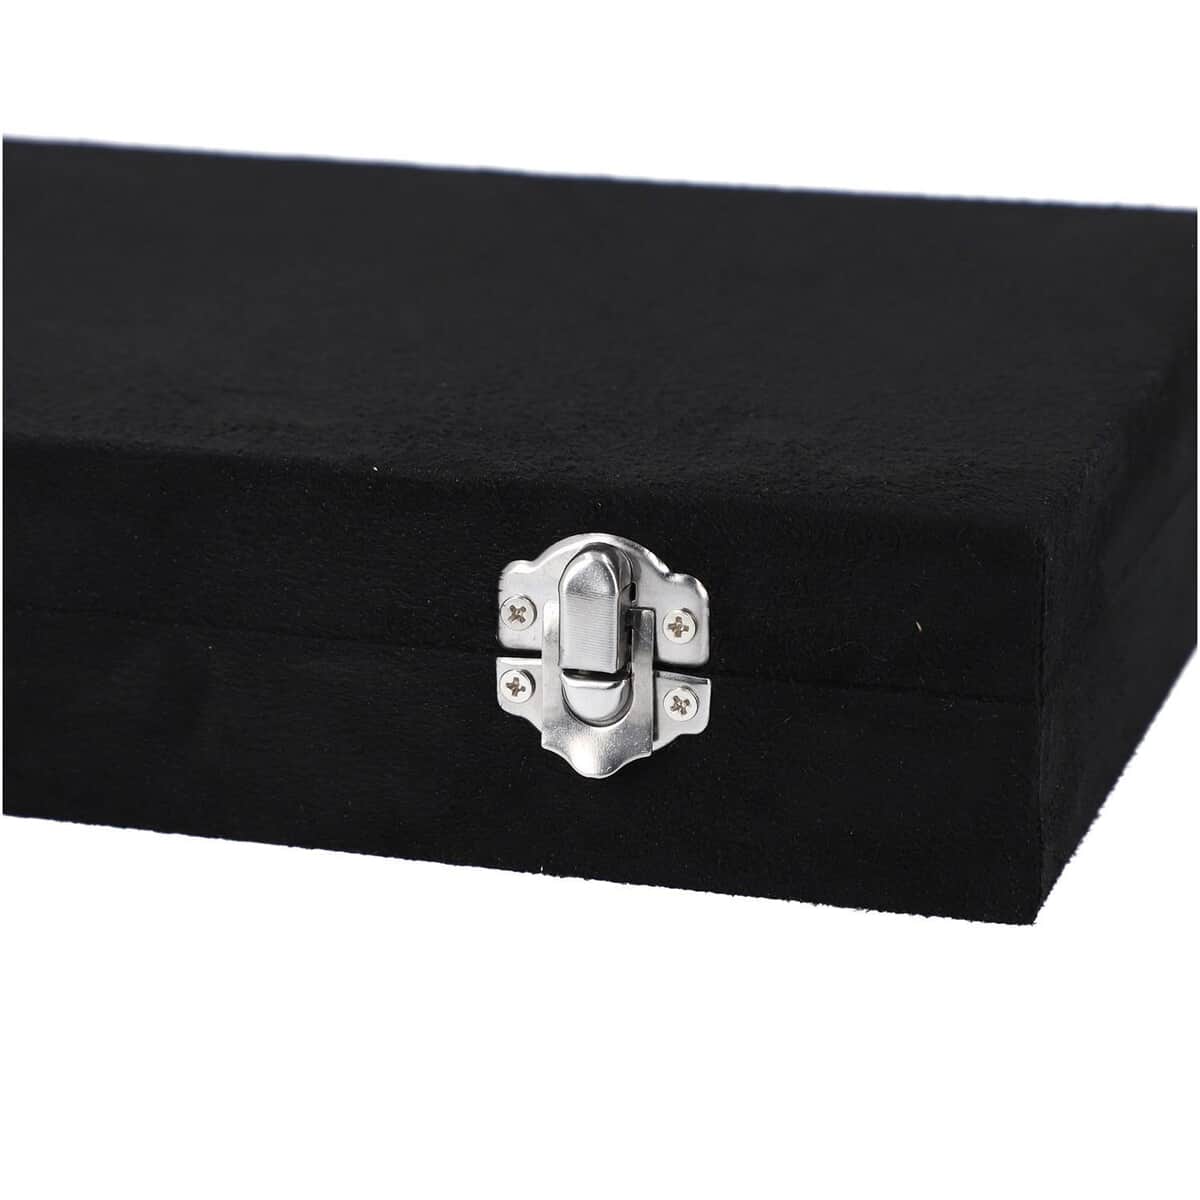 Black Velvet Jewelry Box with Anti Tarnish Lining & Lock (8 Necklace Hooks, 8 Earrings/Pendant Sections and Approx 10 Rings Slots) (11.4"x7.3"x2") image number 6